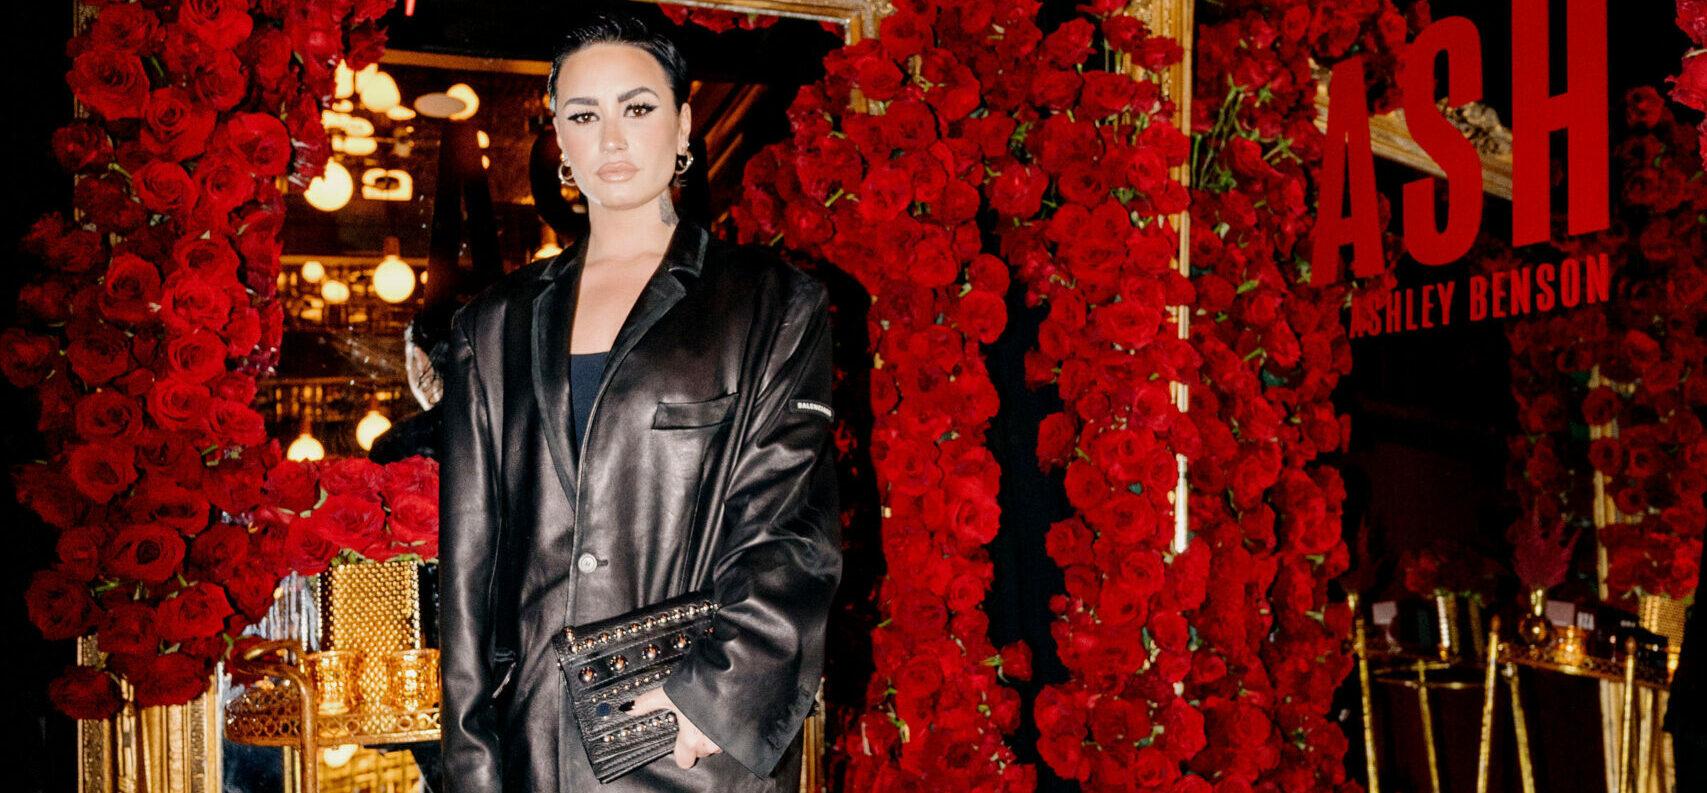 Demi Lovato Loves Up On Boyfriend At ‘The Happiest Place On Earth’